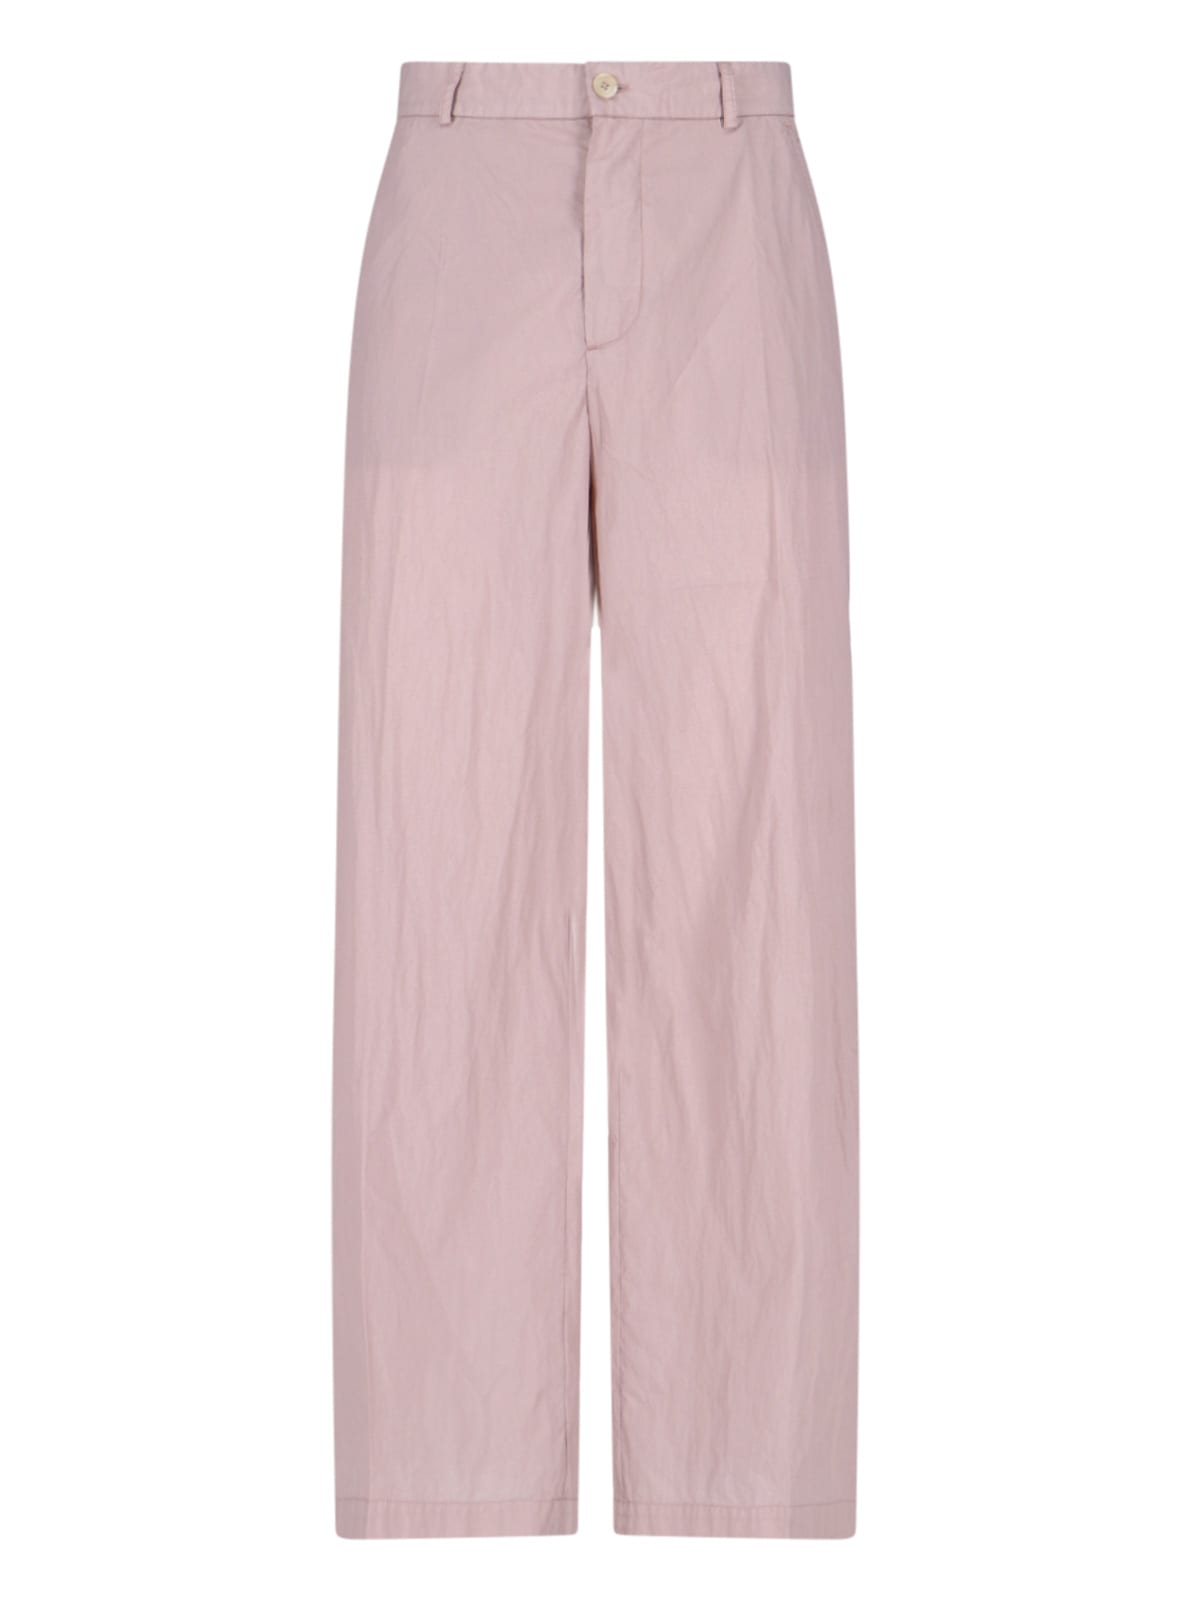 Shop Our Legacy Cheerful Pants In Pink